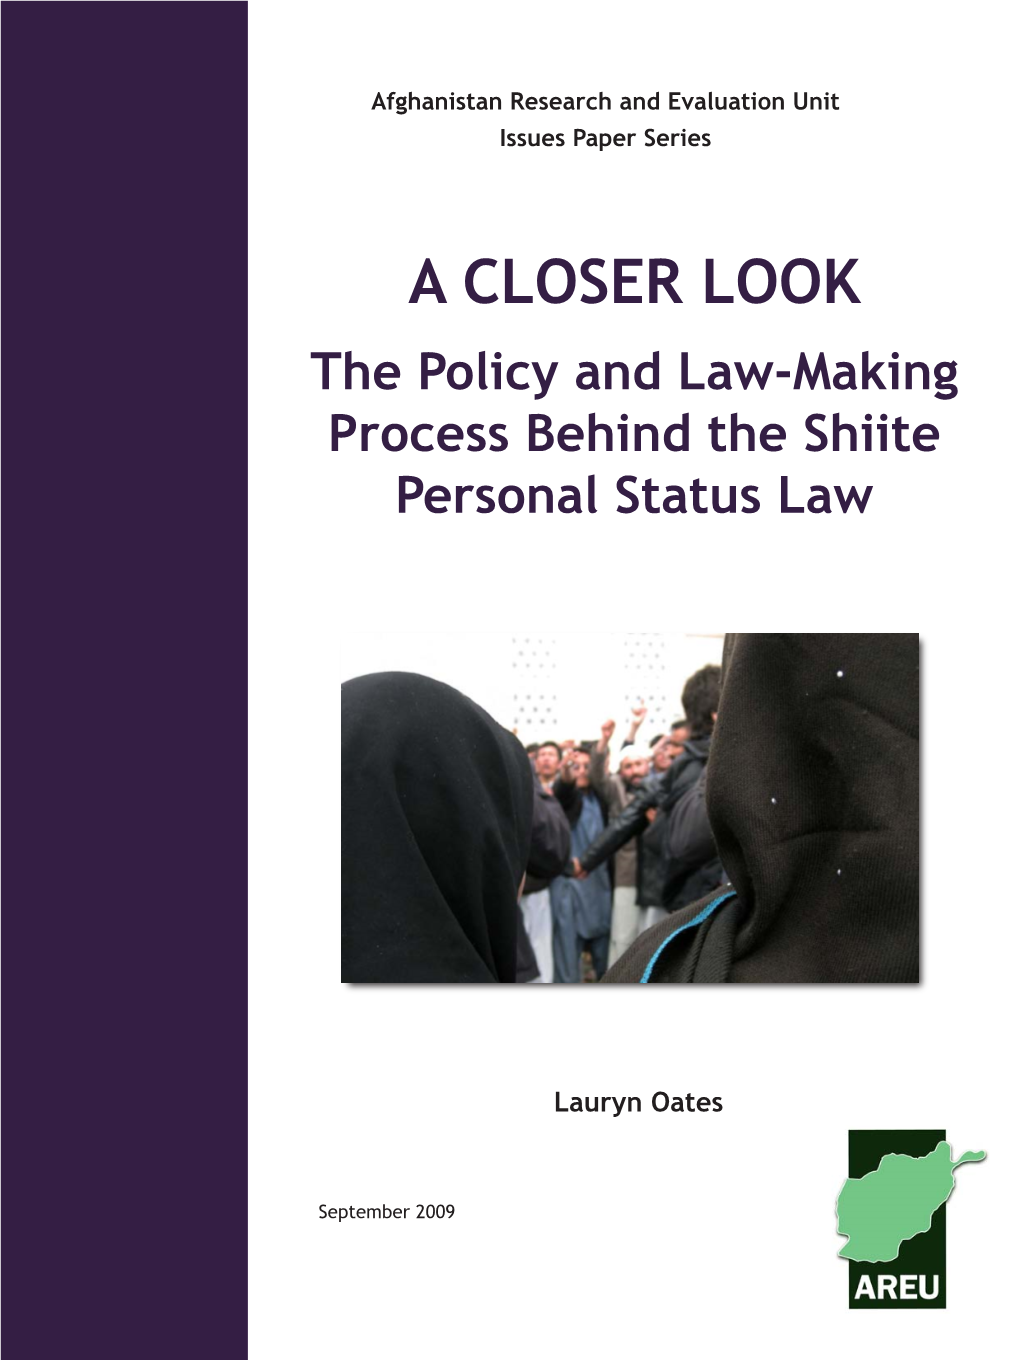 A CLOSER LOOK the Policy and Law-Making Process Behind the Shiite Personal Status Law